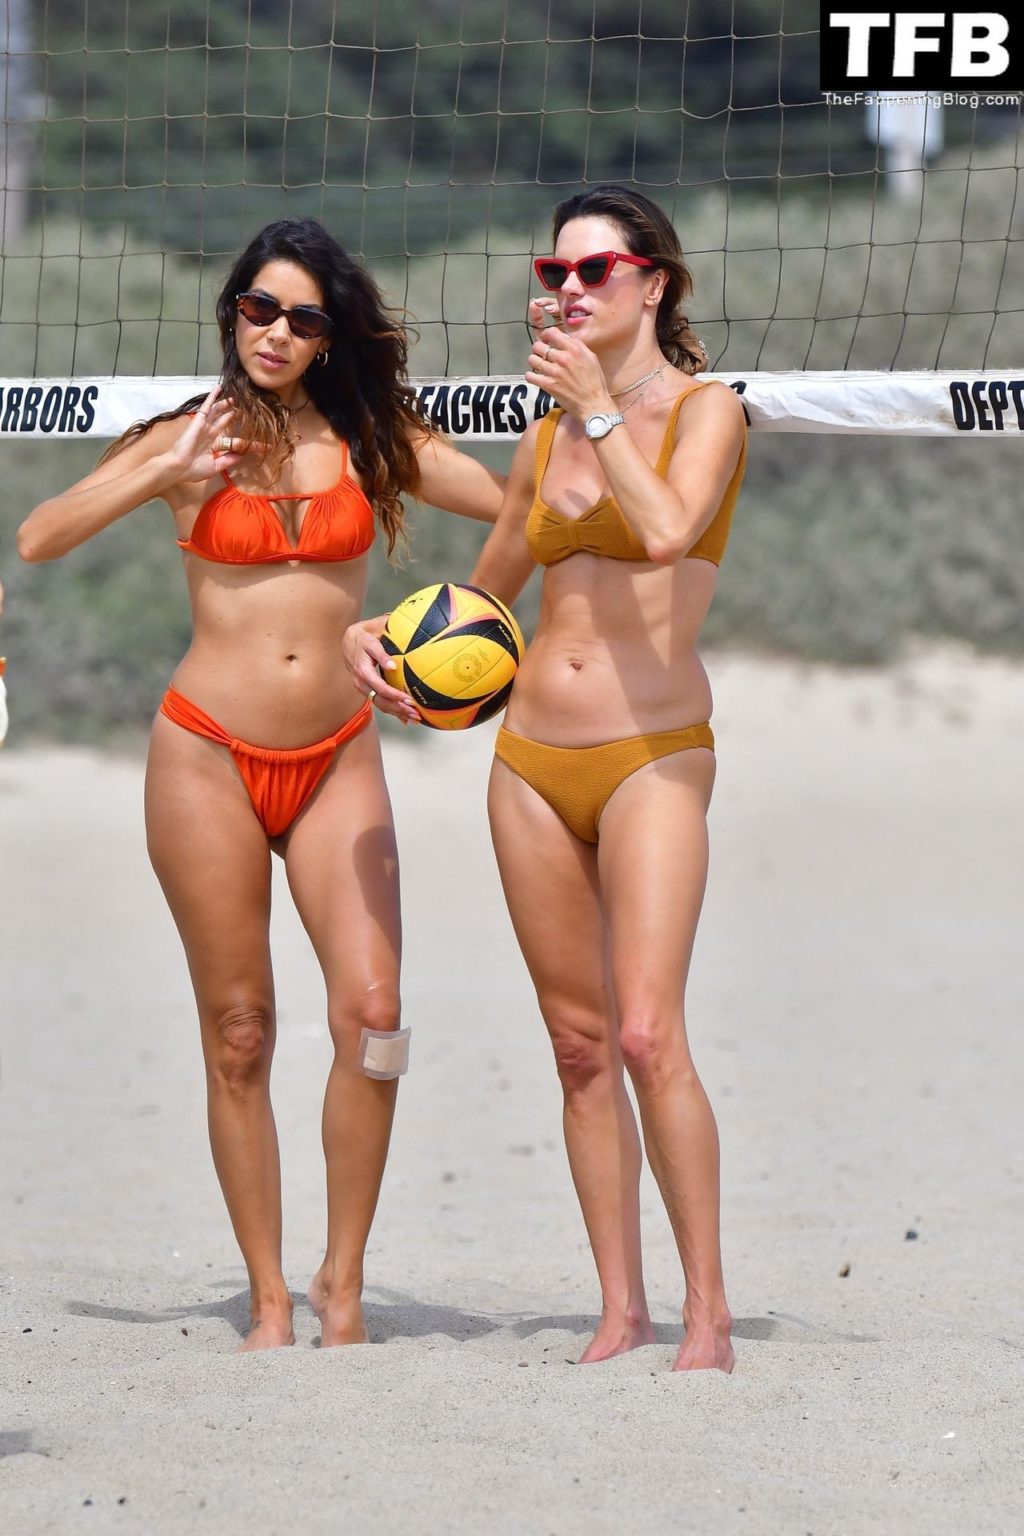 Alessandra Ambrosio Poses for Pictures with a Friend During a Game of Beach Volleyball (150 Photos)